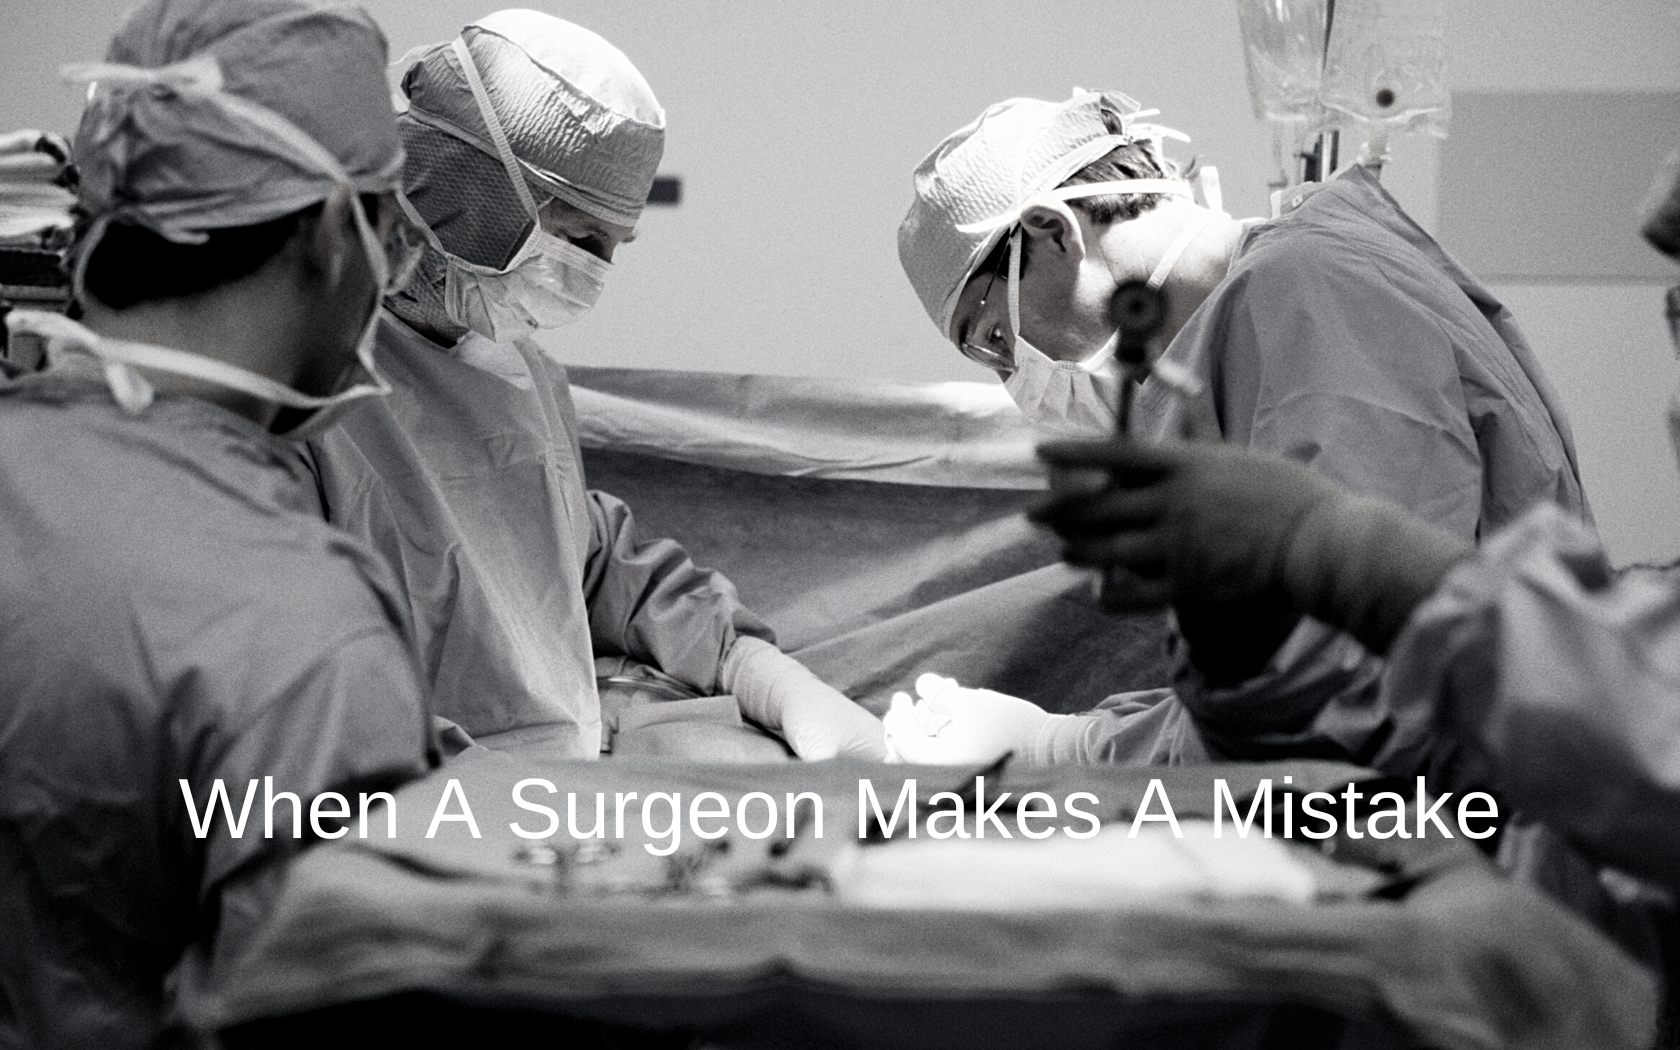 Surgeons can cause damage by making careless errors.